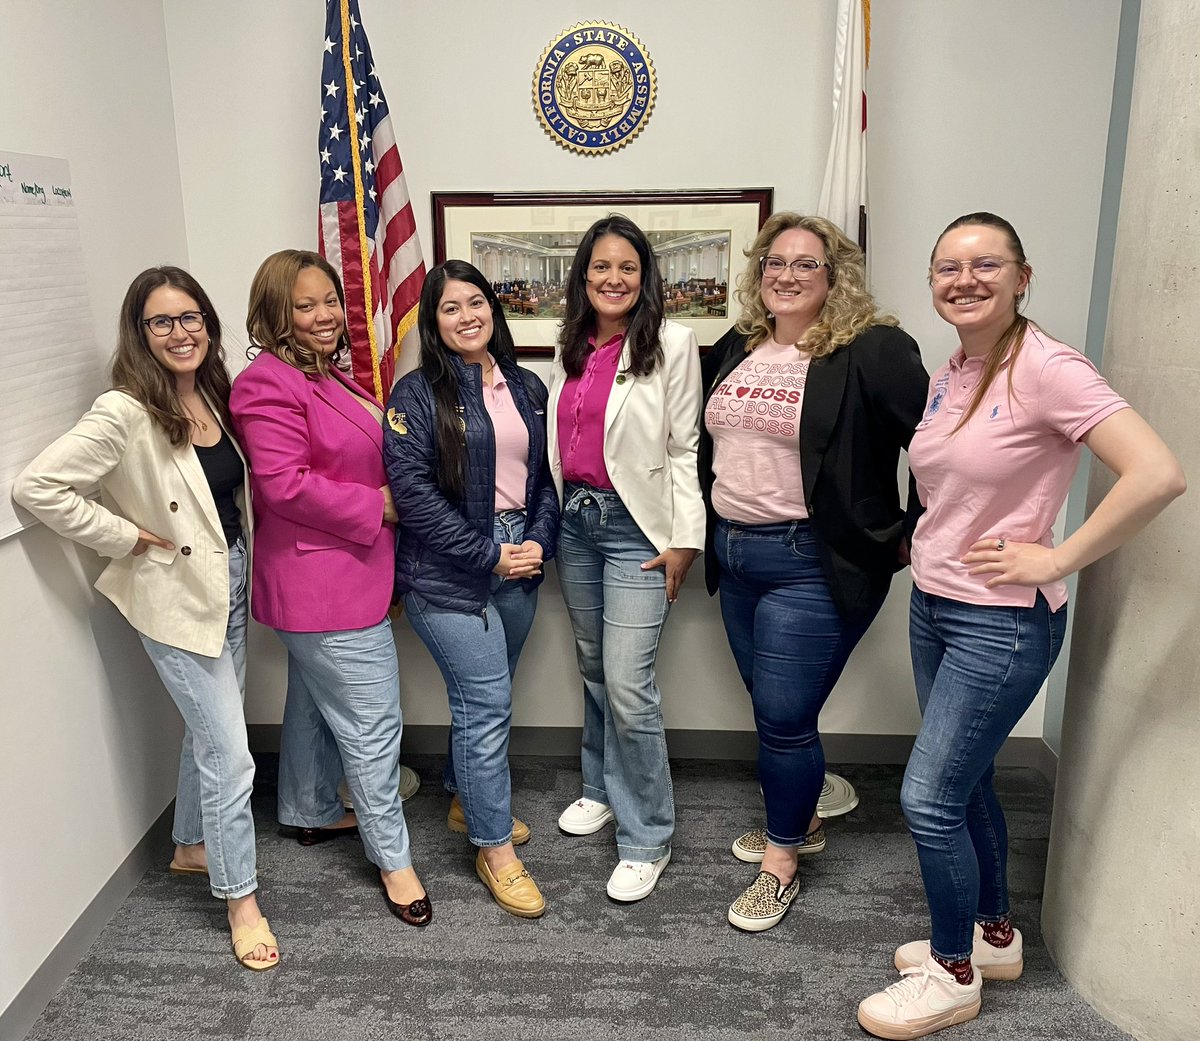 I stand (and dress) in solidarity with survivors of sexual assault. #DenimDay is a reminder to challenge victim-blaming attitudes, support survivors and promote consent, no matter what someone looks like or what they are wearing. #SAAM #TeamPacheco @CaWomensCaucus